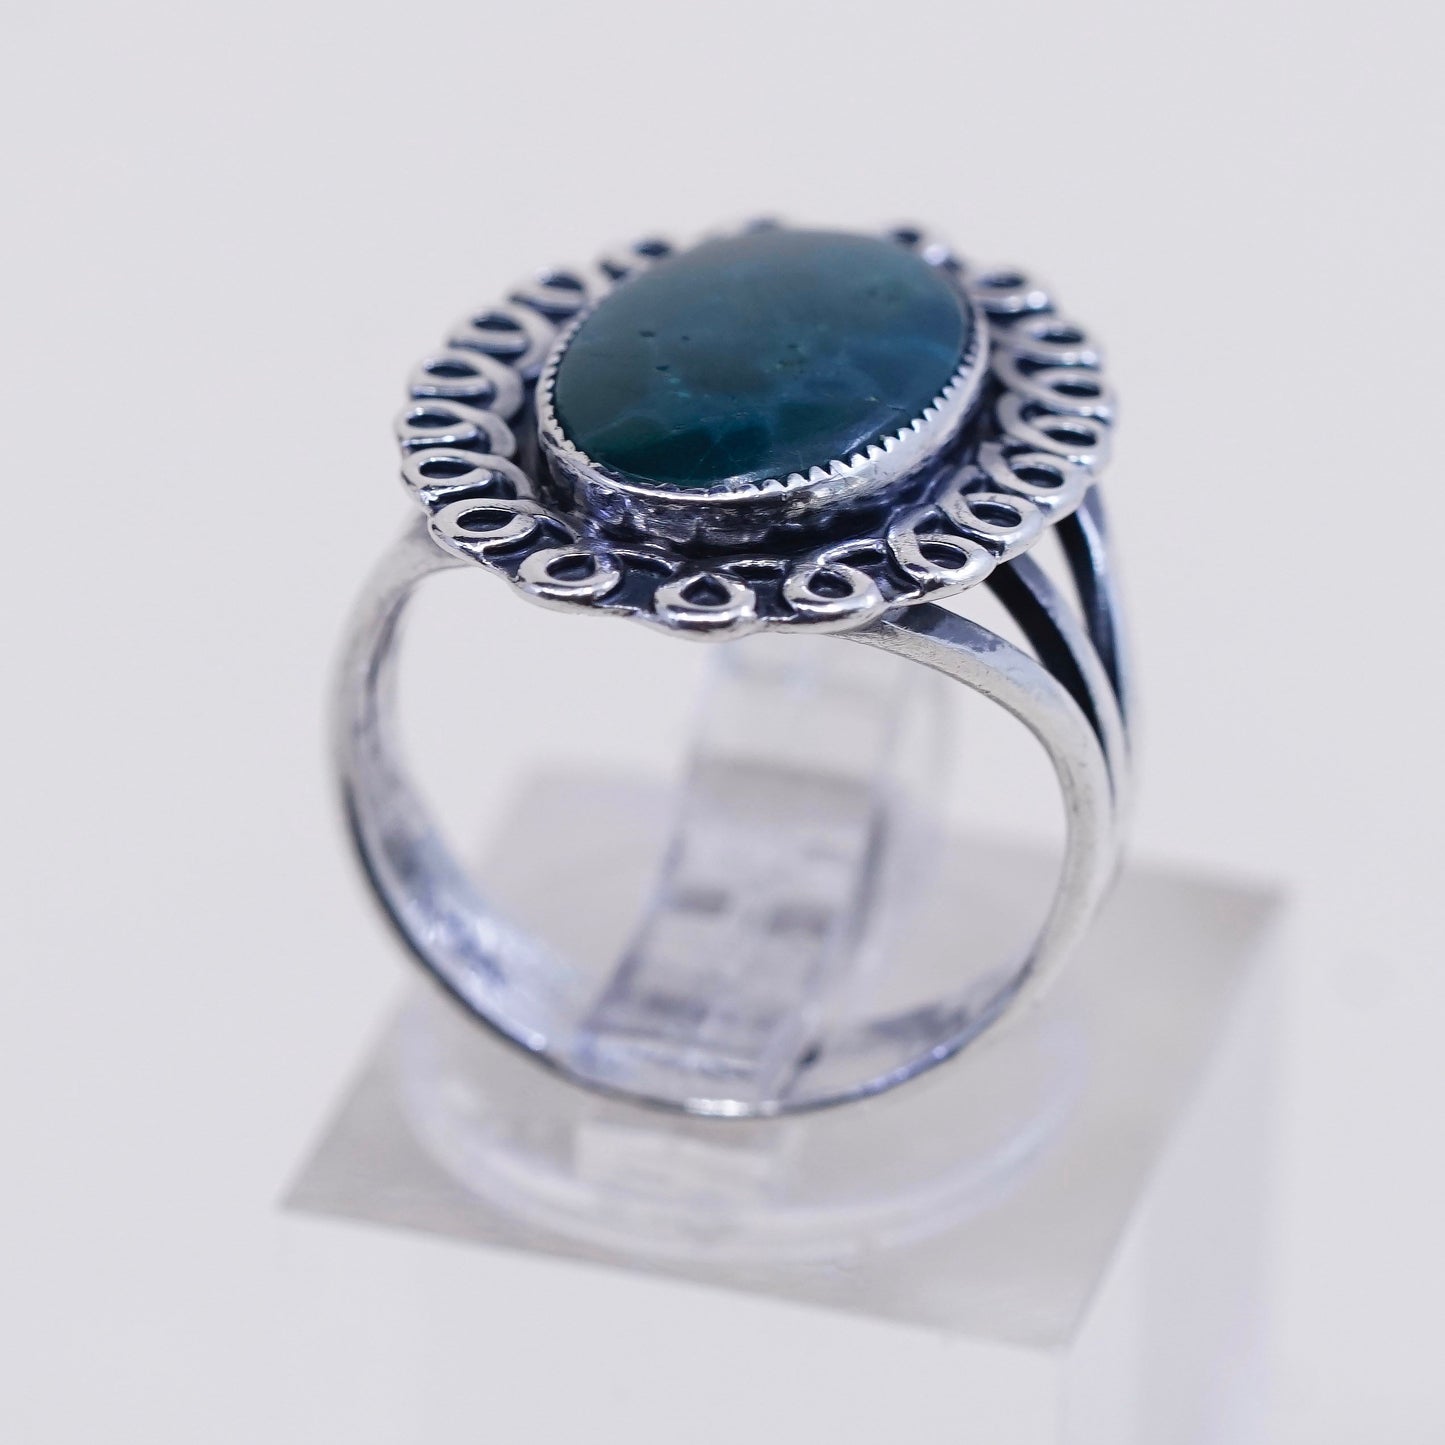 sz 4.5 Native American sterling 925 silver ring w/ turquoise, southwestern